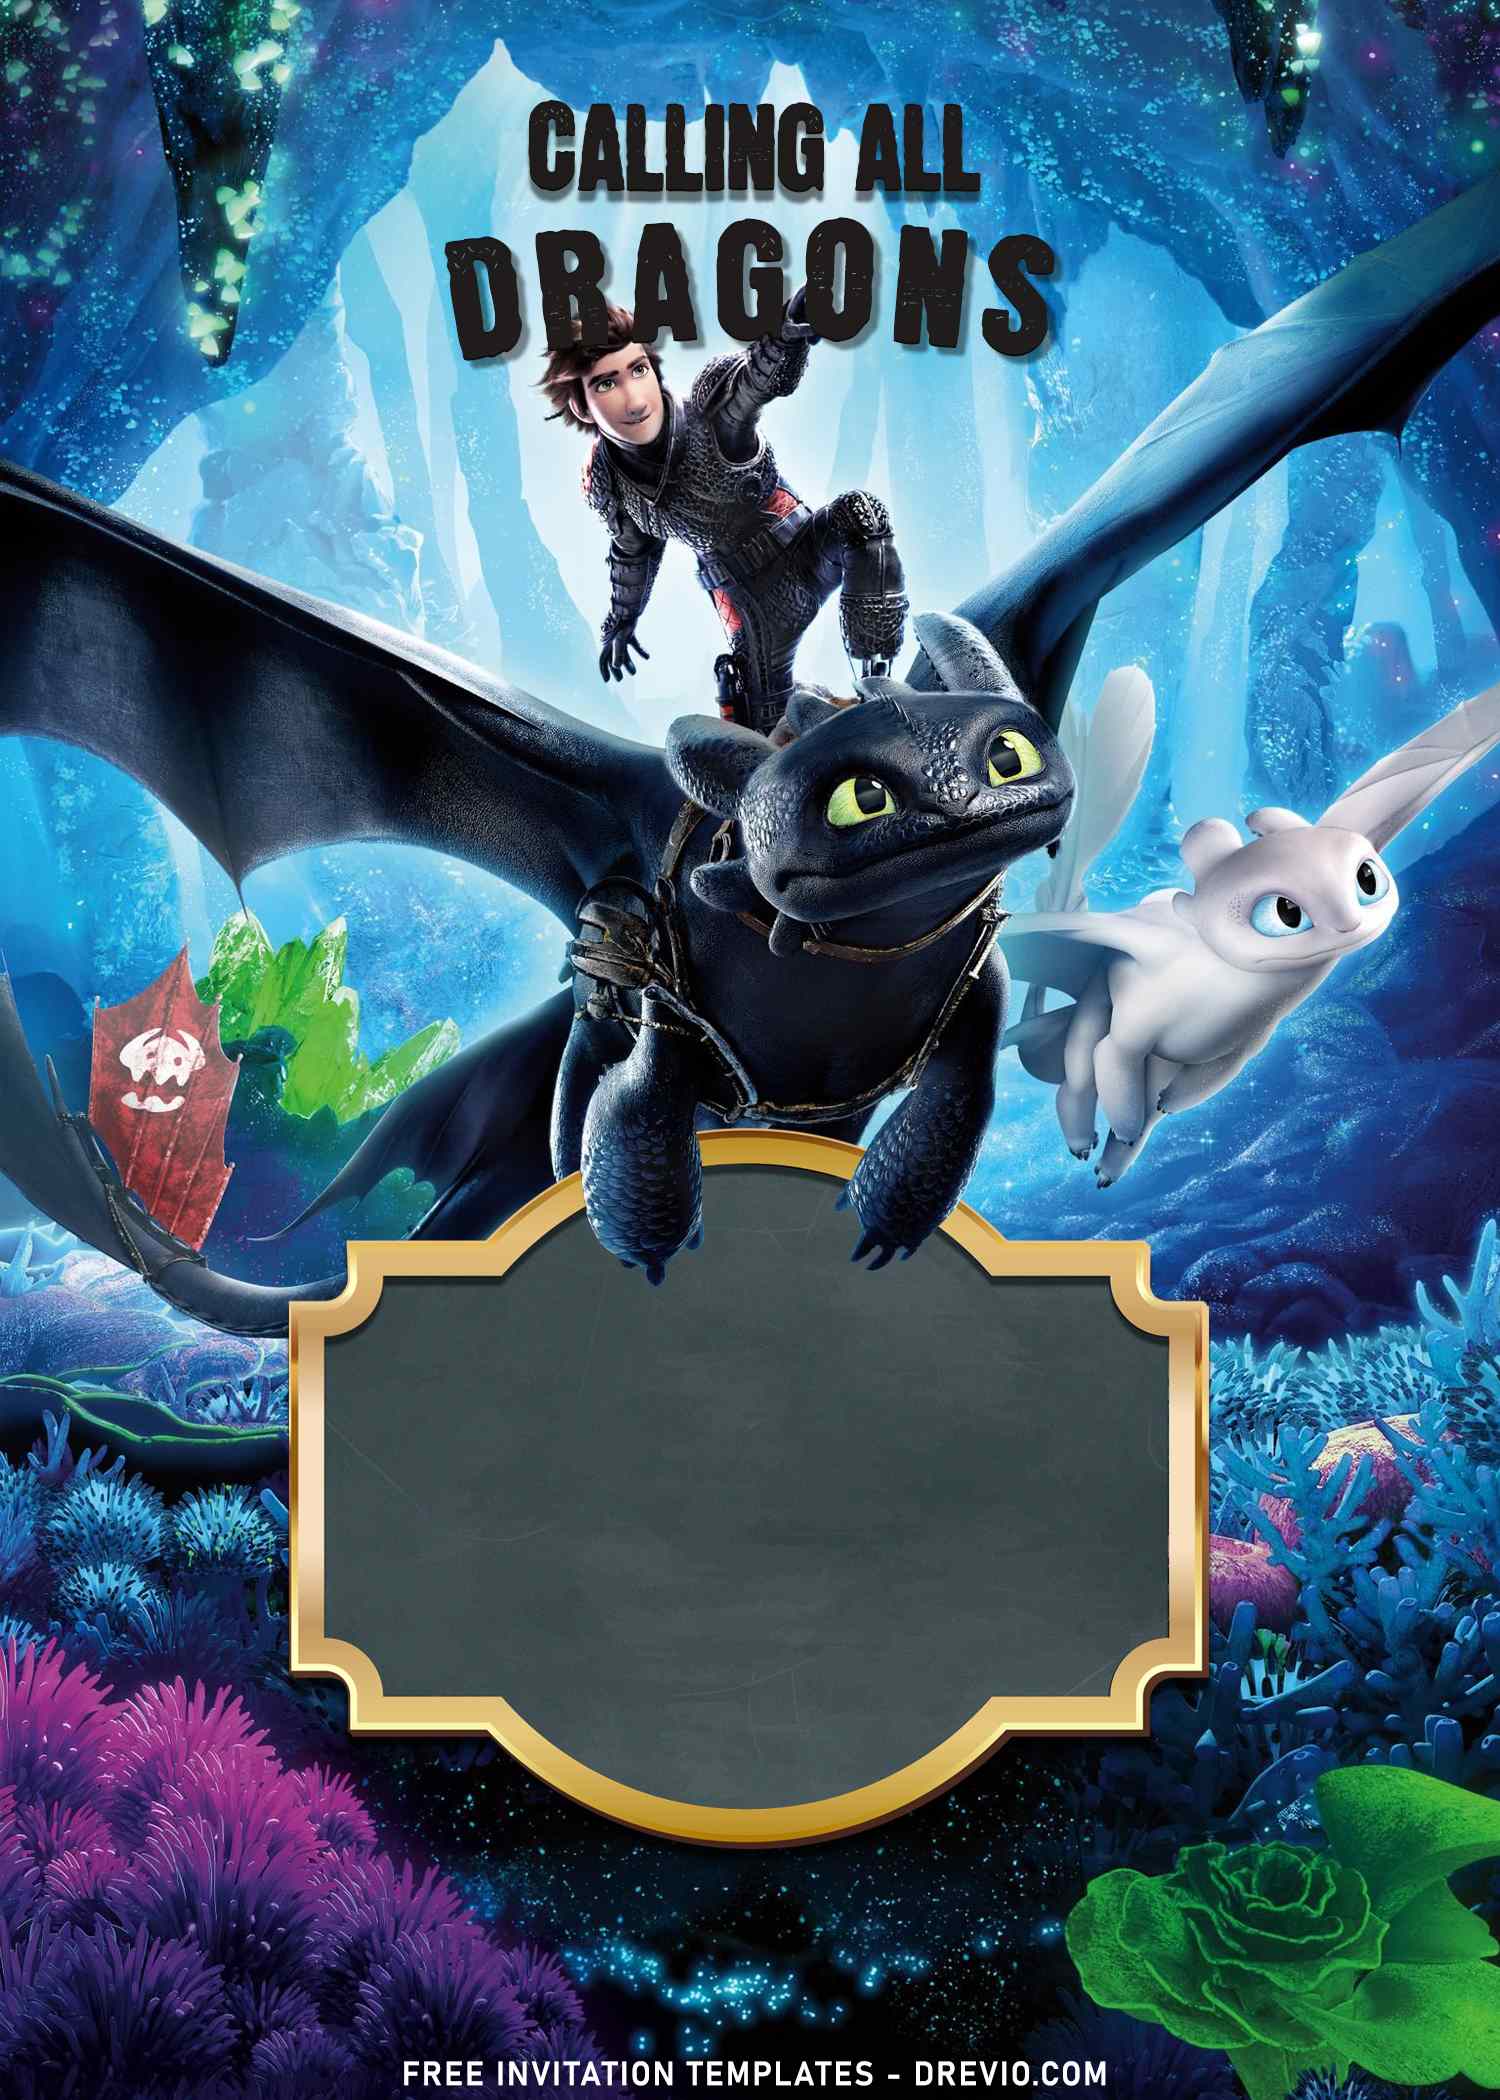 8+ How To Train Your Dragon Birthday Invitation Templates | Download ...